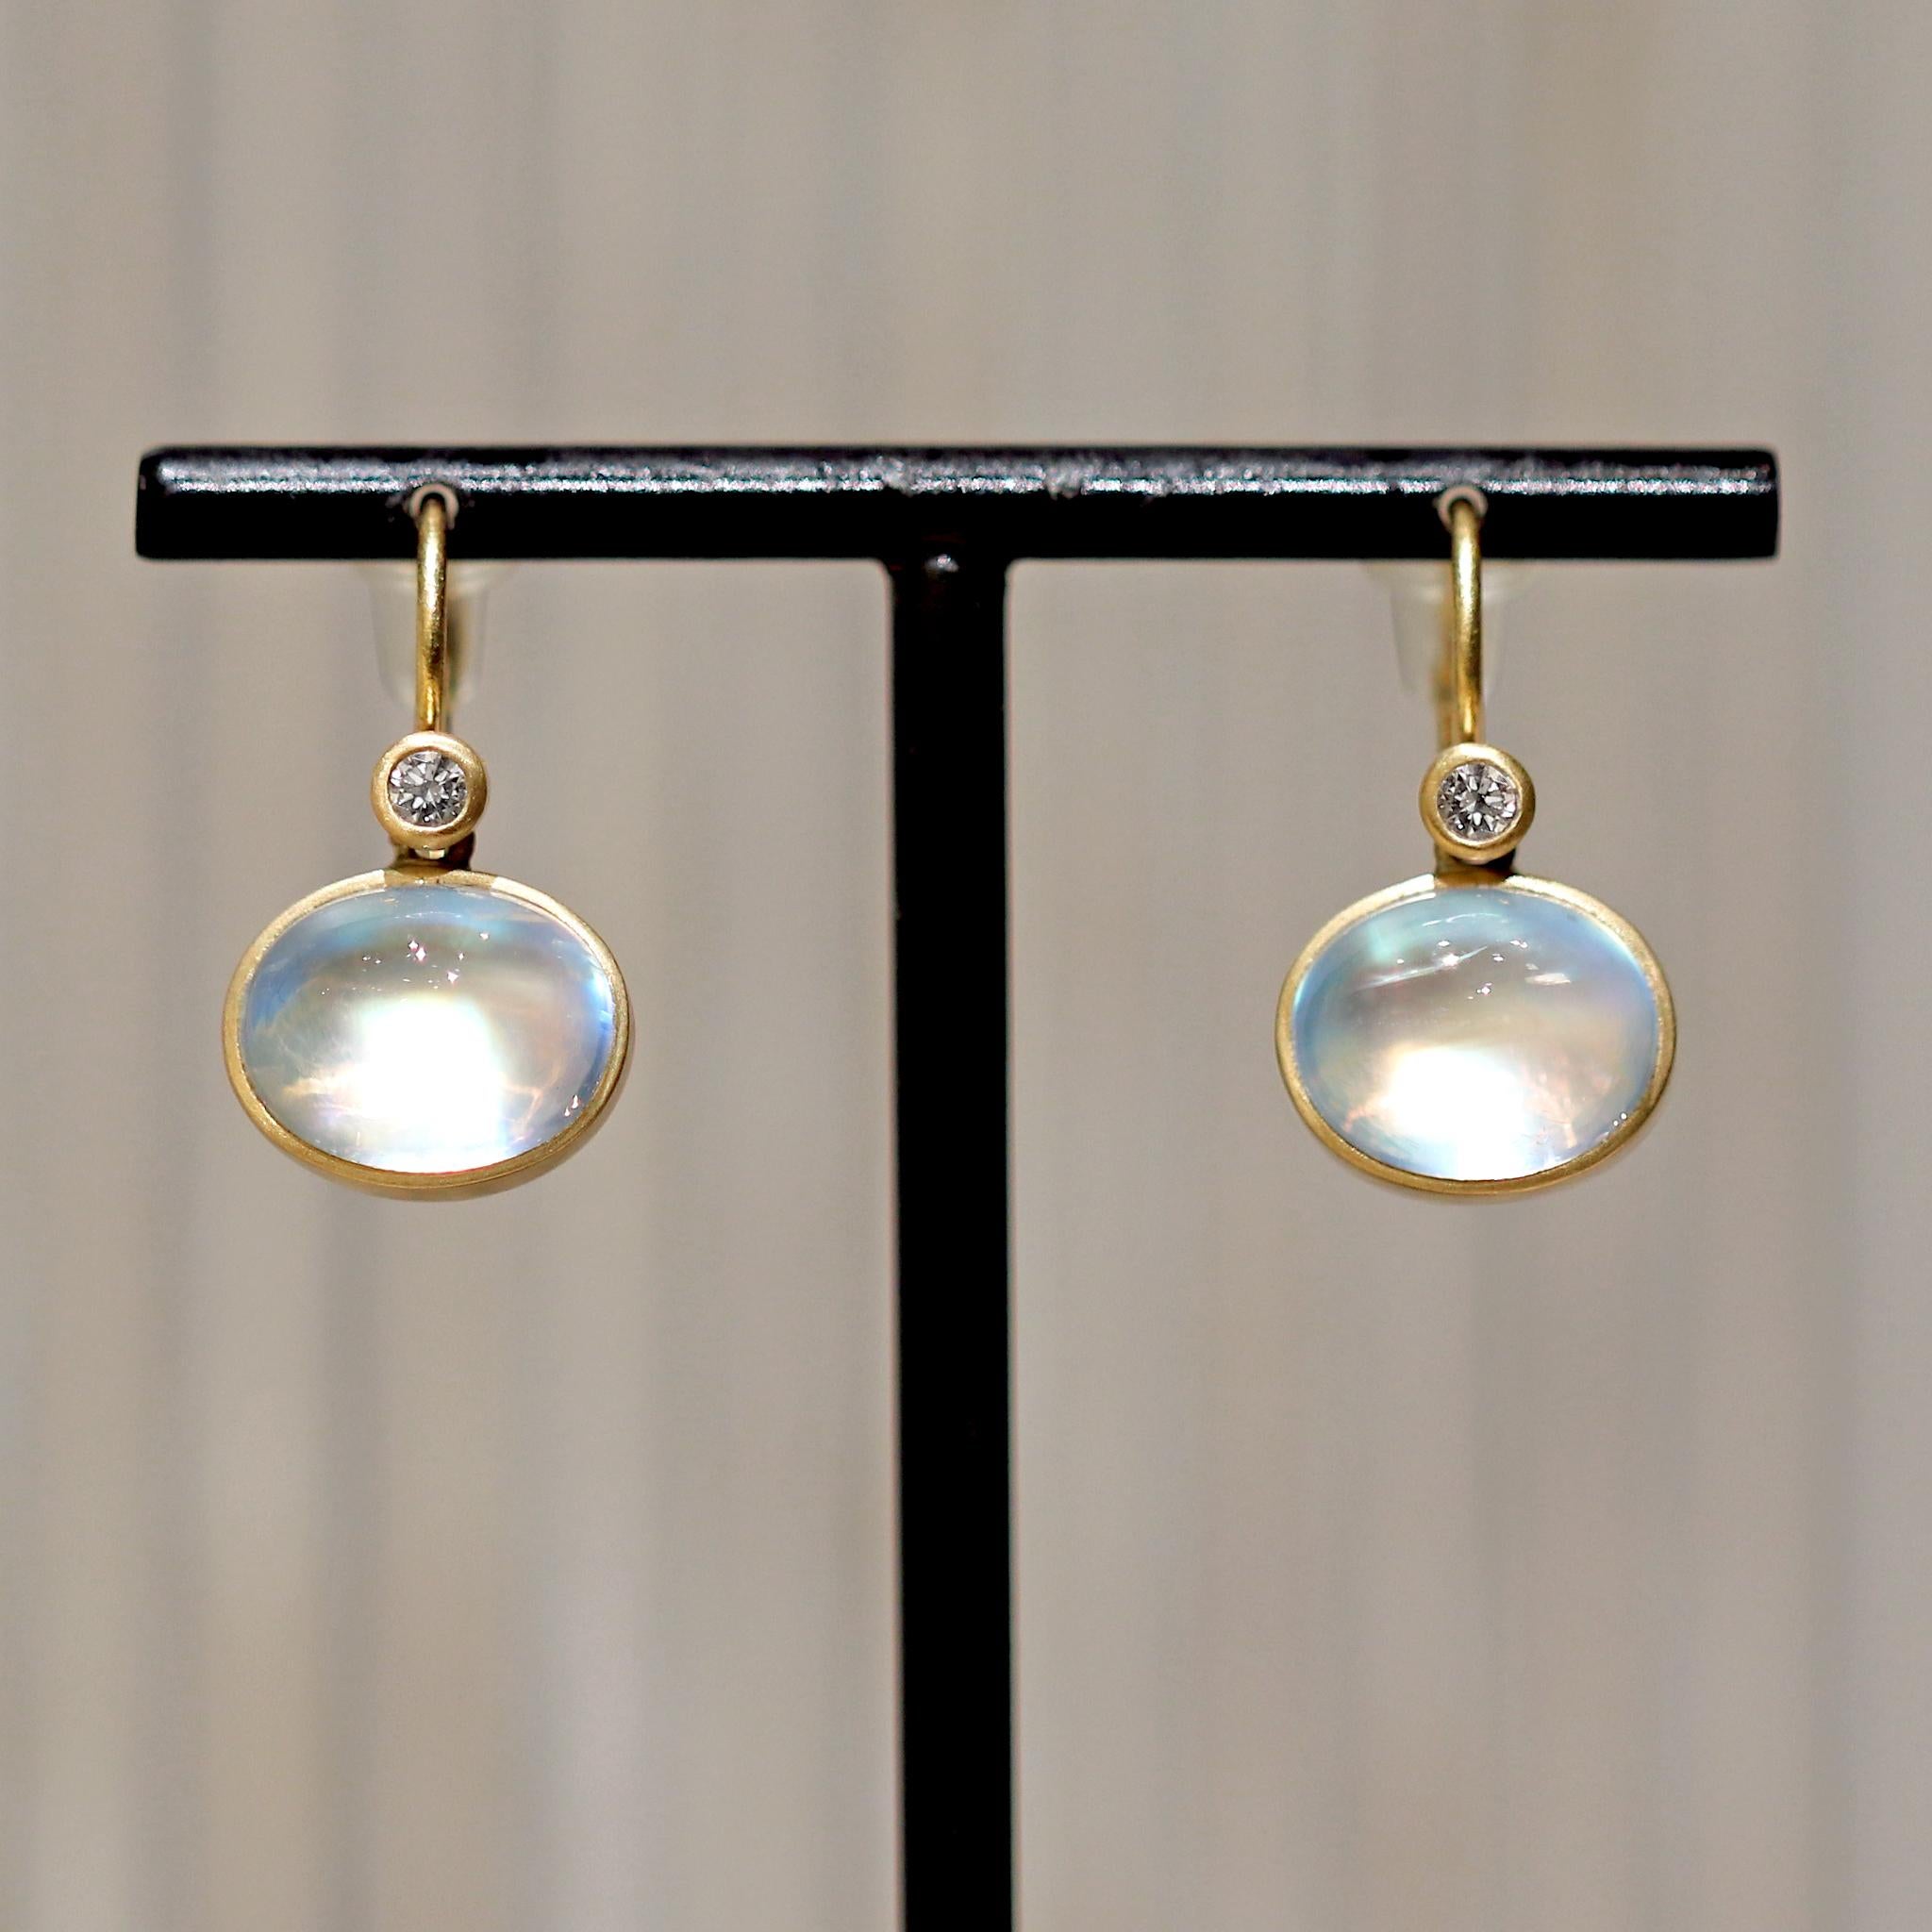 One of a Kind Double Gem Earrings by jewelry maker Lola Brooks hand-fabricated in 18k yellow gold featuring a spectacular matched pair of translucent rainbow moonstone oval cabochons totaling 6.89 carats, bezel-set and complemented by 0.01 carat